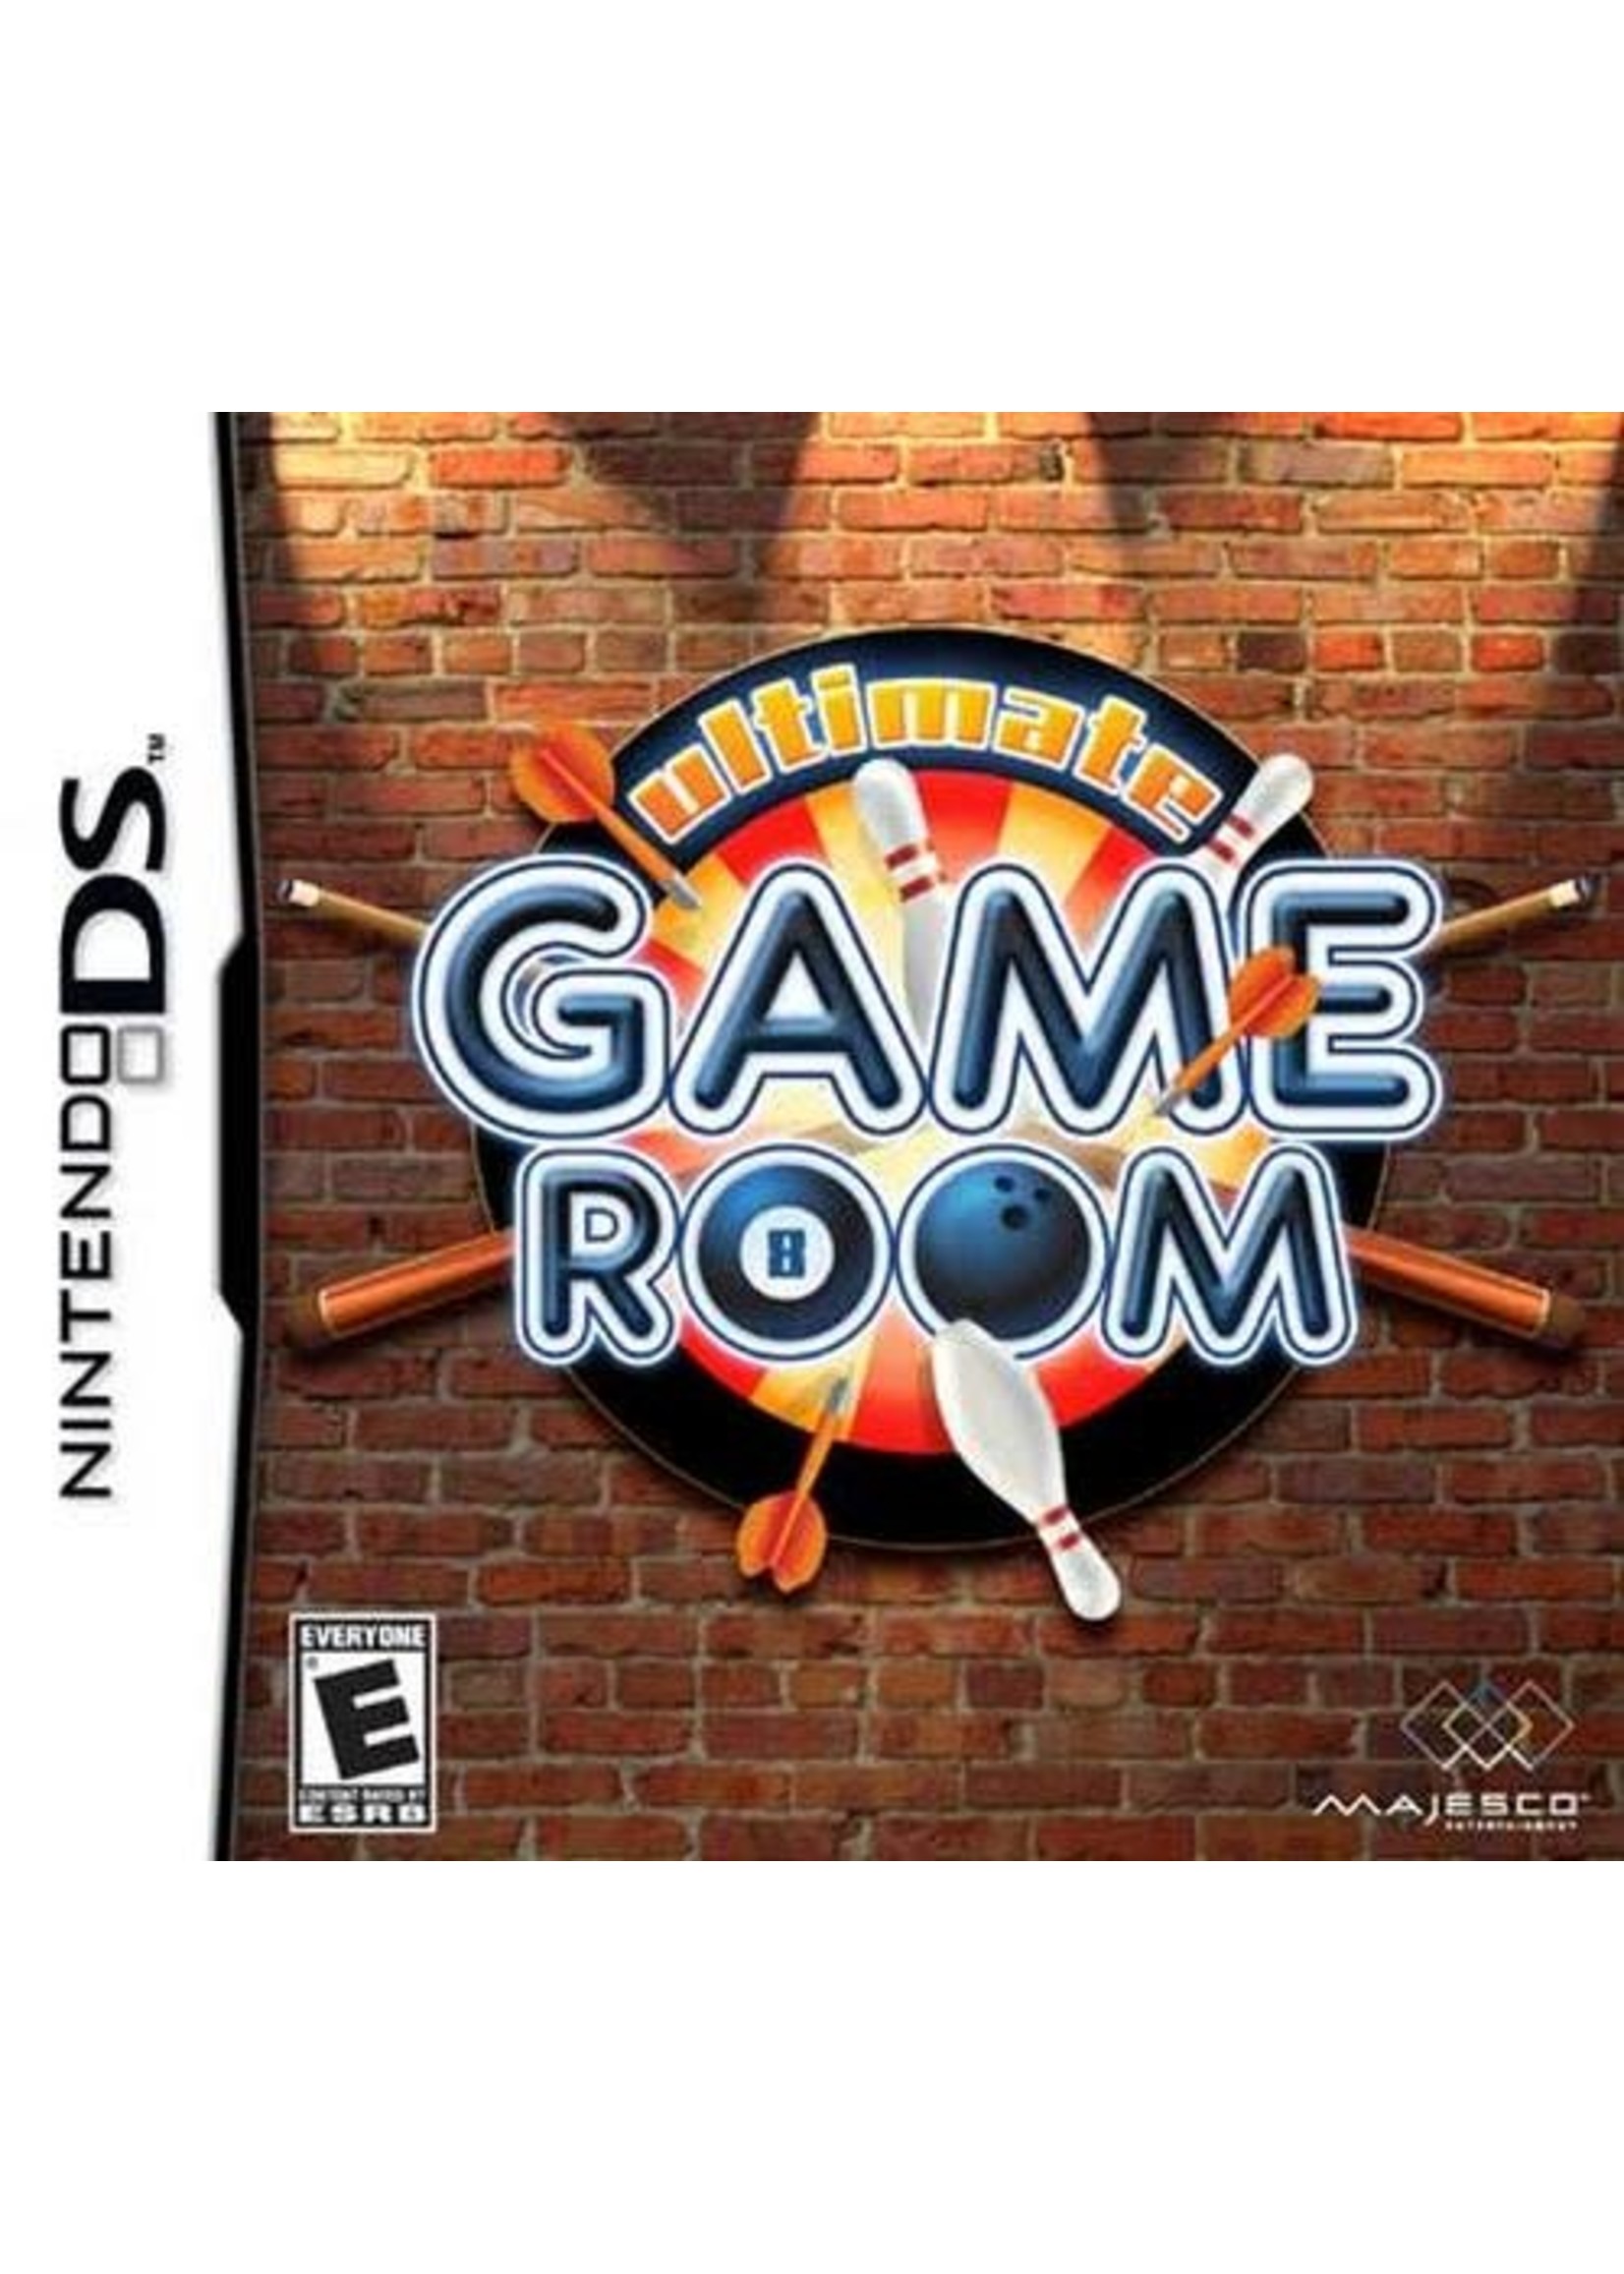 Nintendo DS Ultimate Game Room - Cart Only